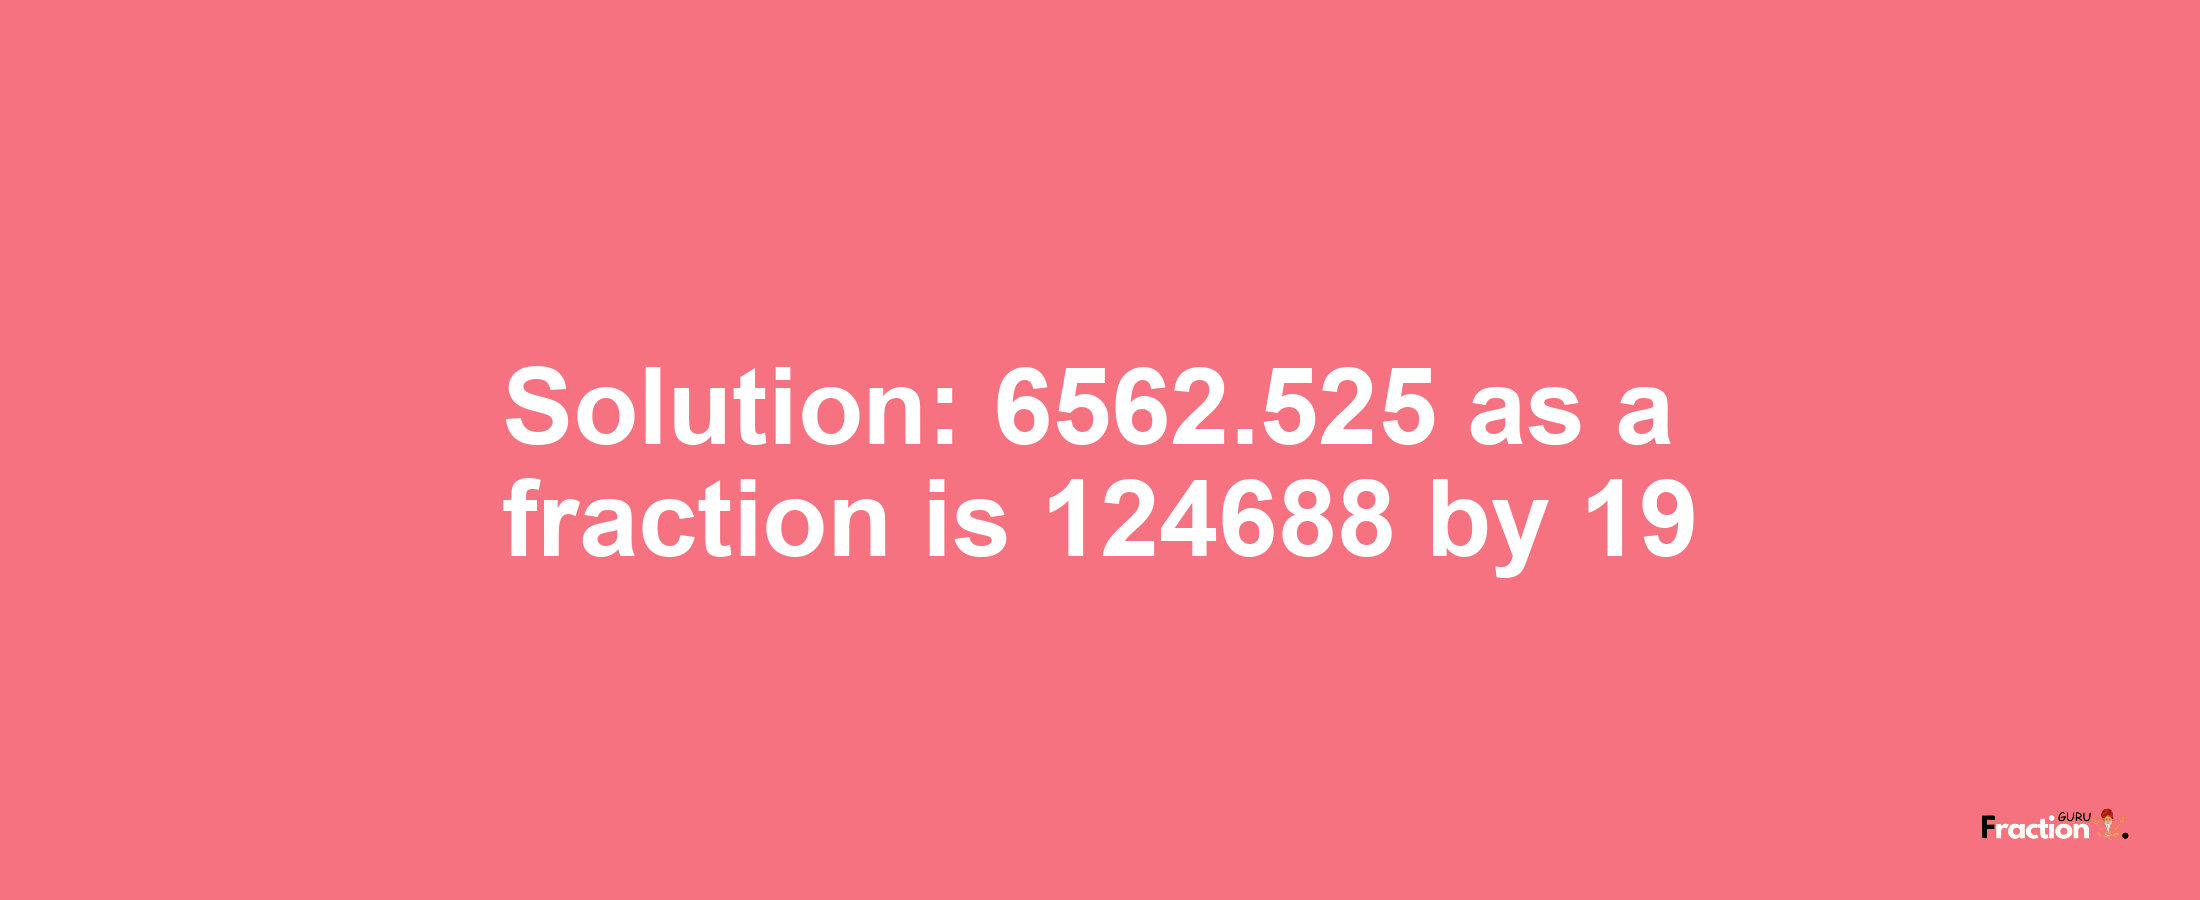 Solution:6562.525 as a fraction is 124688/19